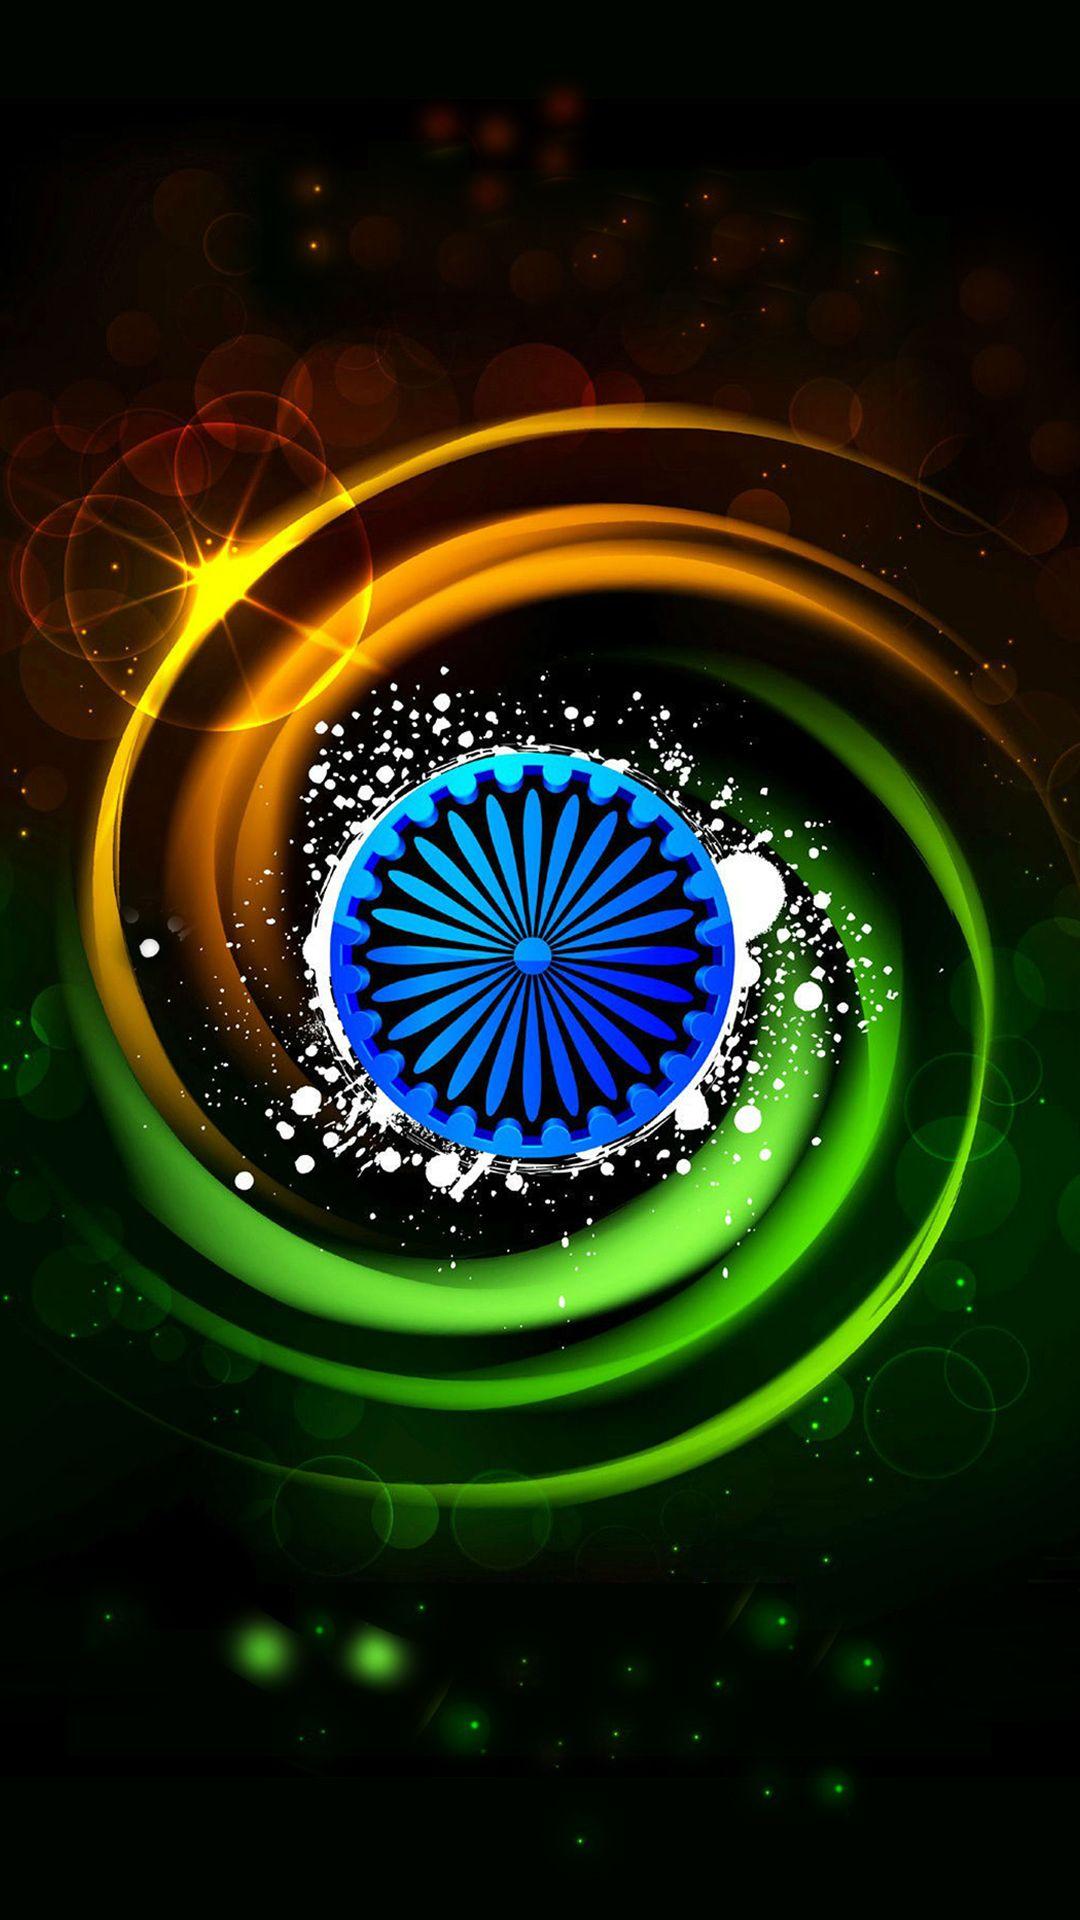 India Flag for Mobile Phone Wallpaper 08 of 17